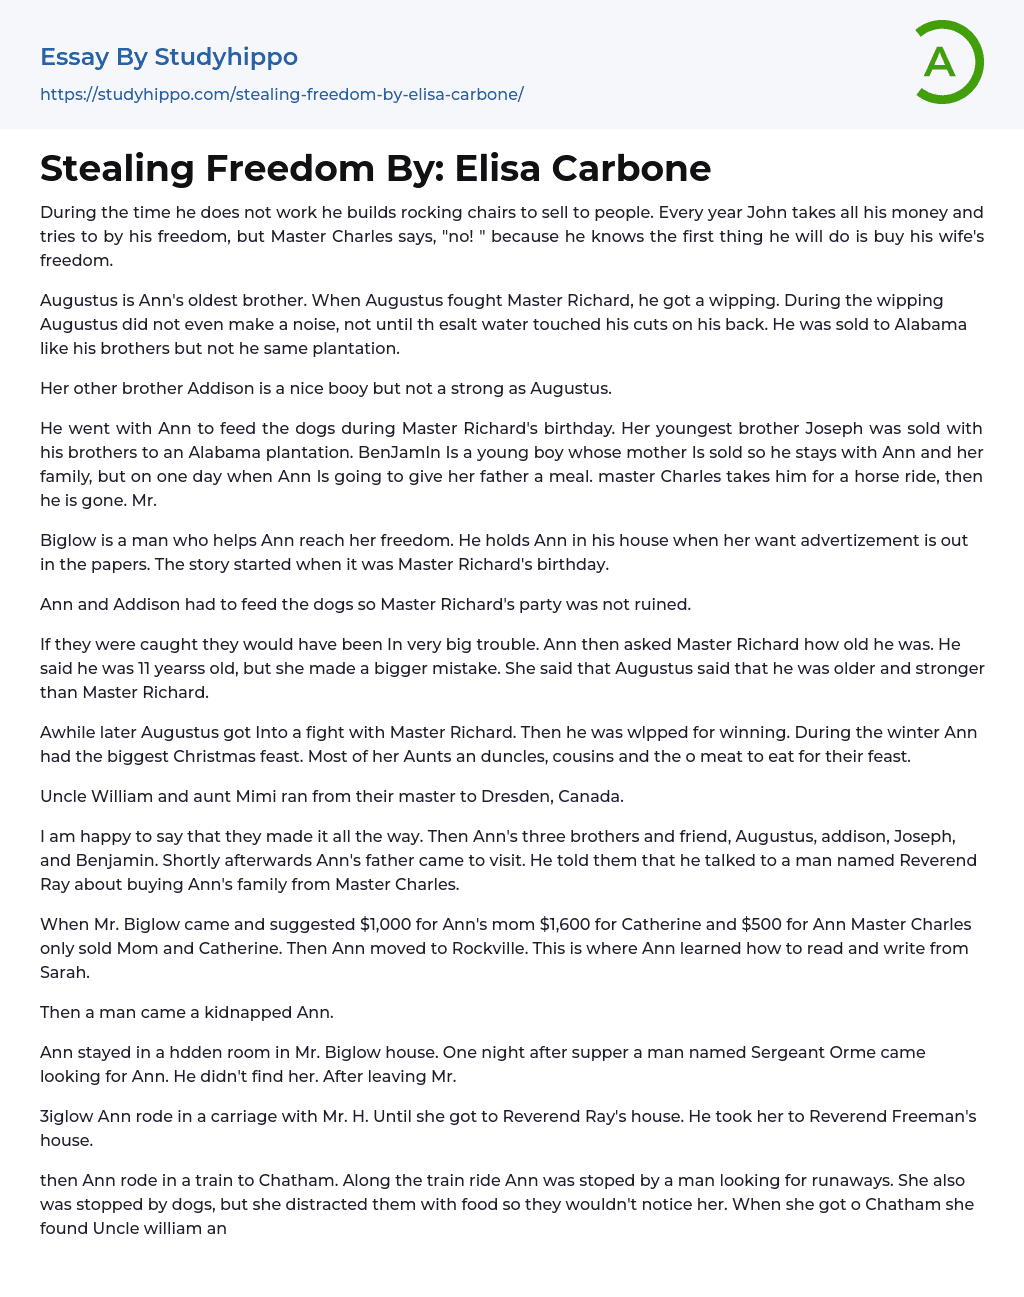 Stealing Freedom By: Elisa Carbone Essay Example